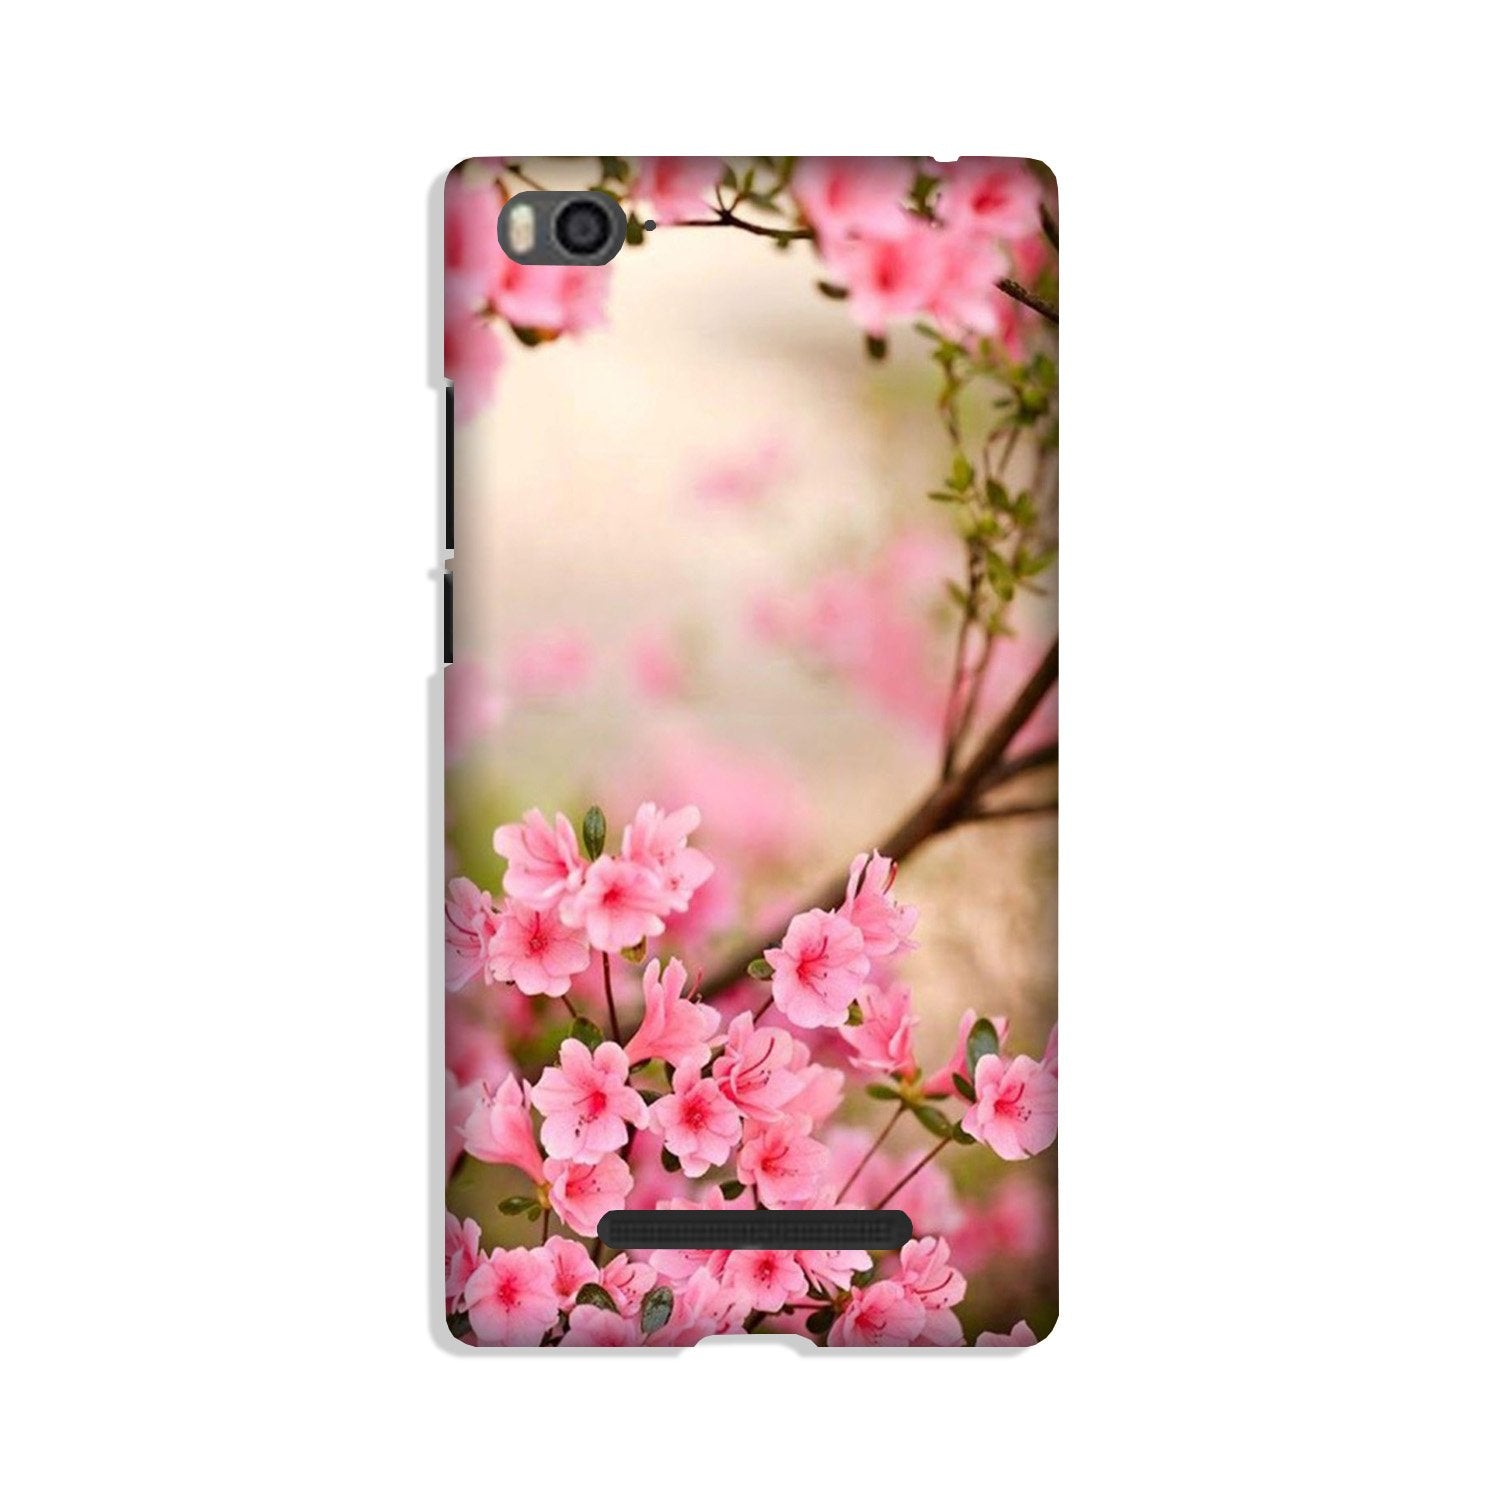 Pink flowers Case for Xiaomi Redmi 5A